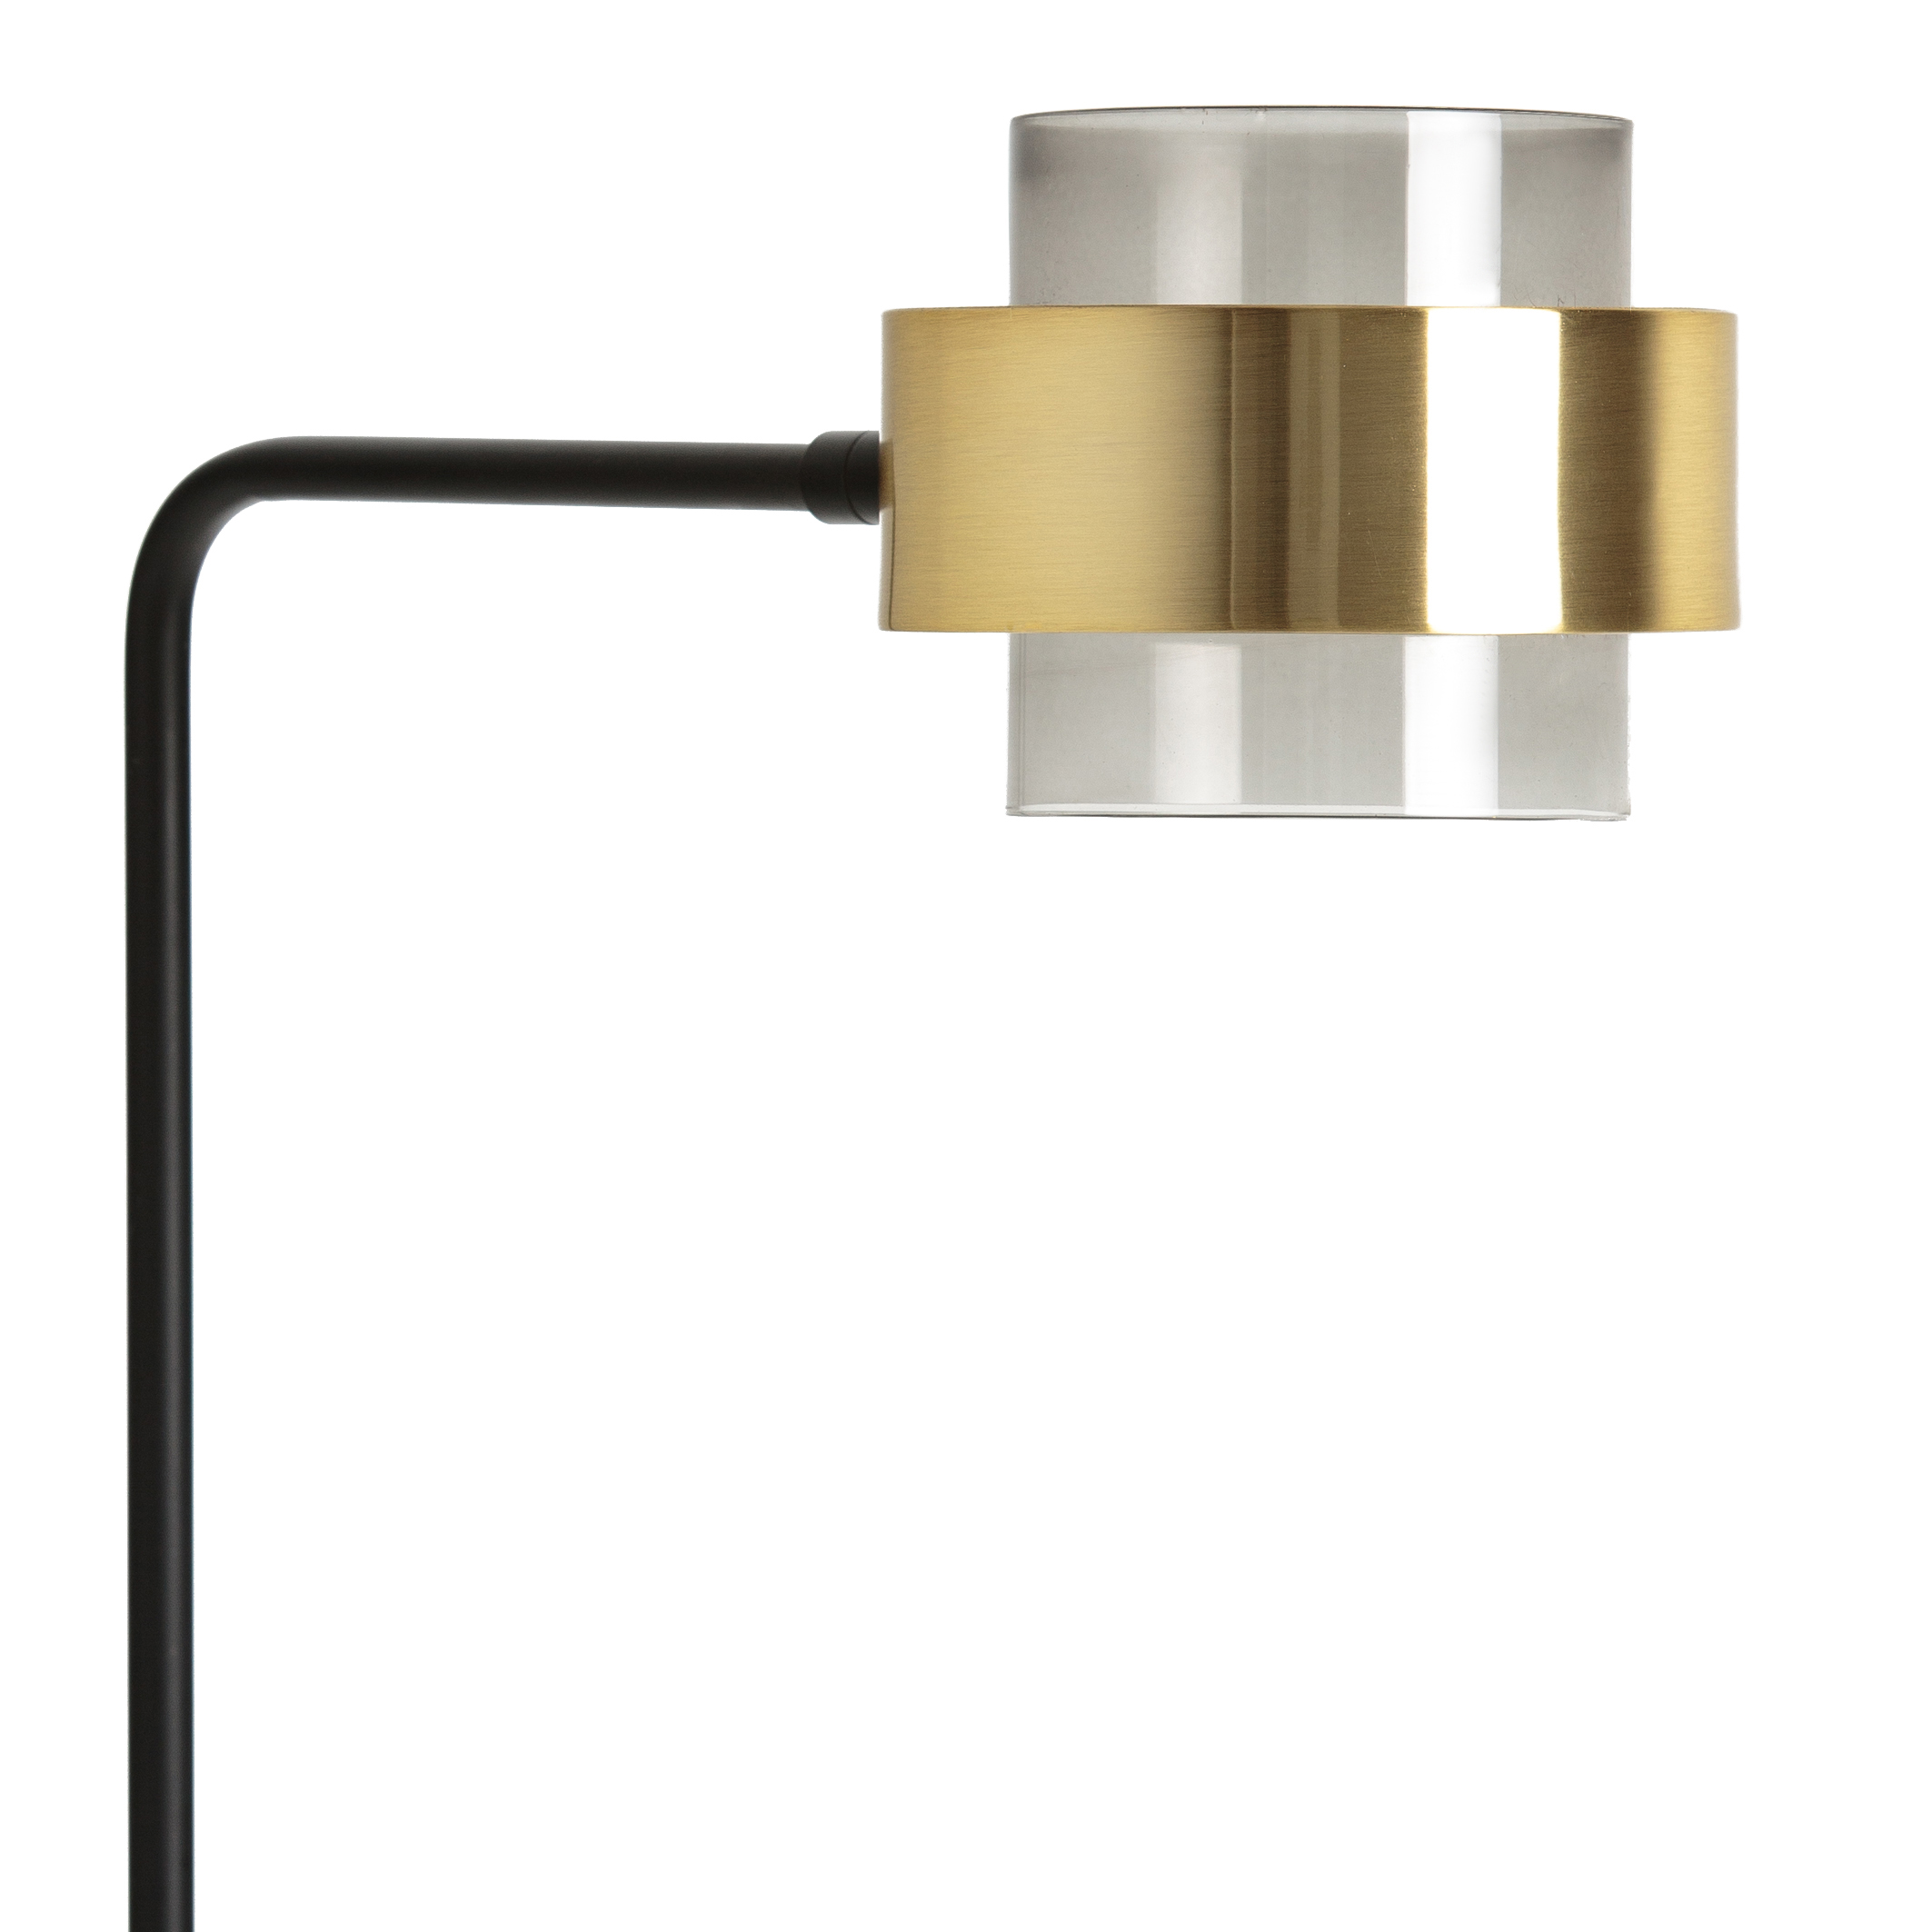 Botello metal & glass reading black/brass floor Interieurs adjustable Redoute La arms lamp with Redoute La 